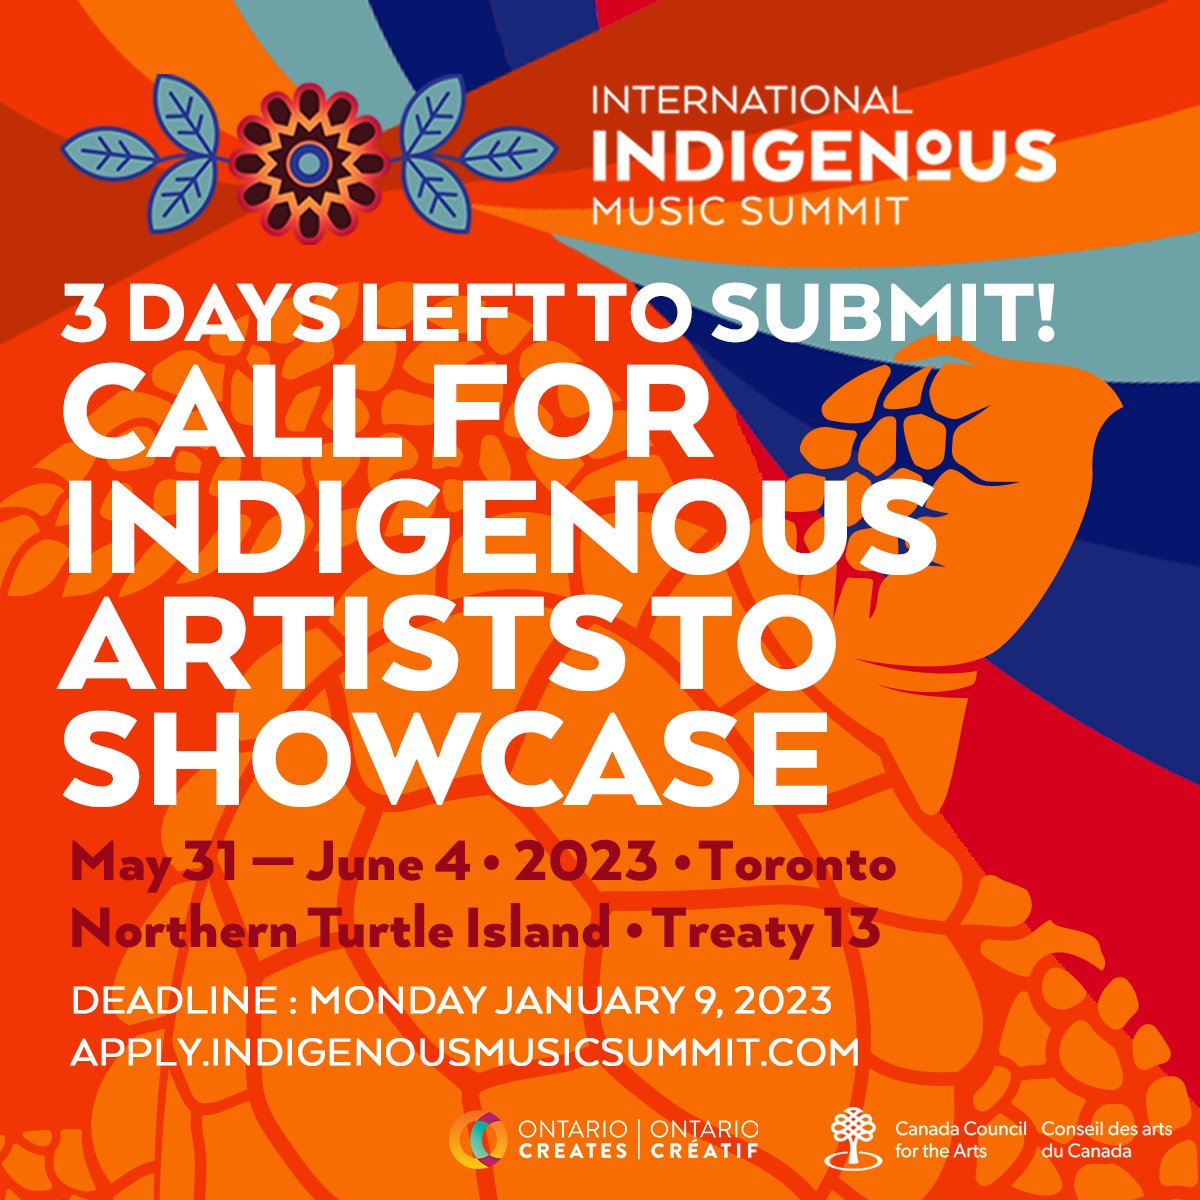 There's only 3 days left to apply to showcase at #IIMS2023! We encourage Indigenous artists from across the globe to join us for our 1st ever, standalone, in-person event. Any genre of music, contemporary or traditional, will be considered: apply.indigenousmusicsummit.com